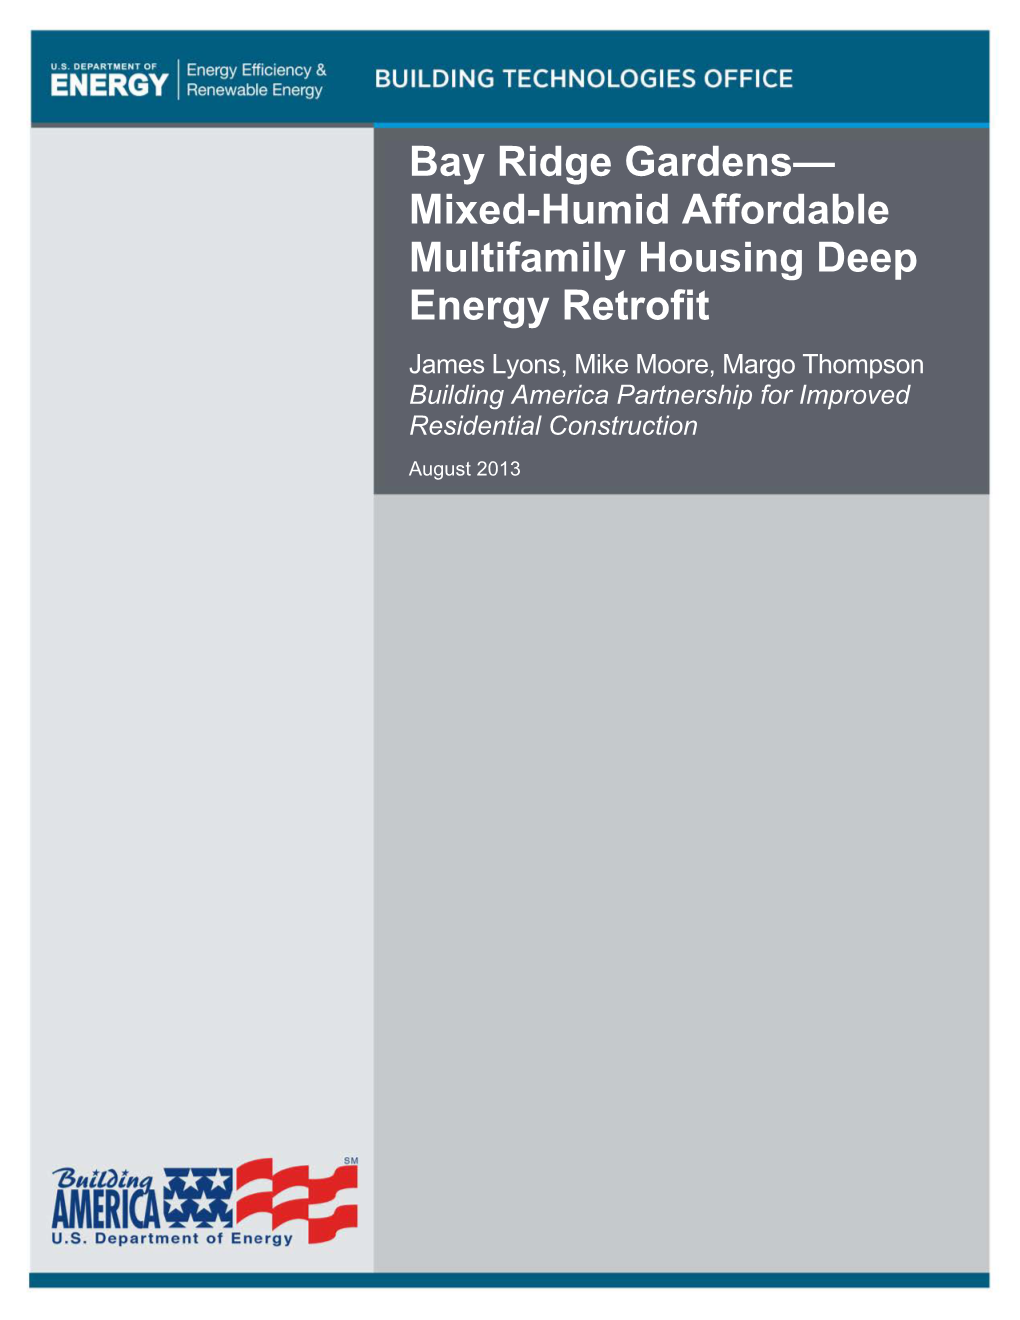 Mixed Humid Affordable Multifamily Housing Deep Energy Retrofit